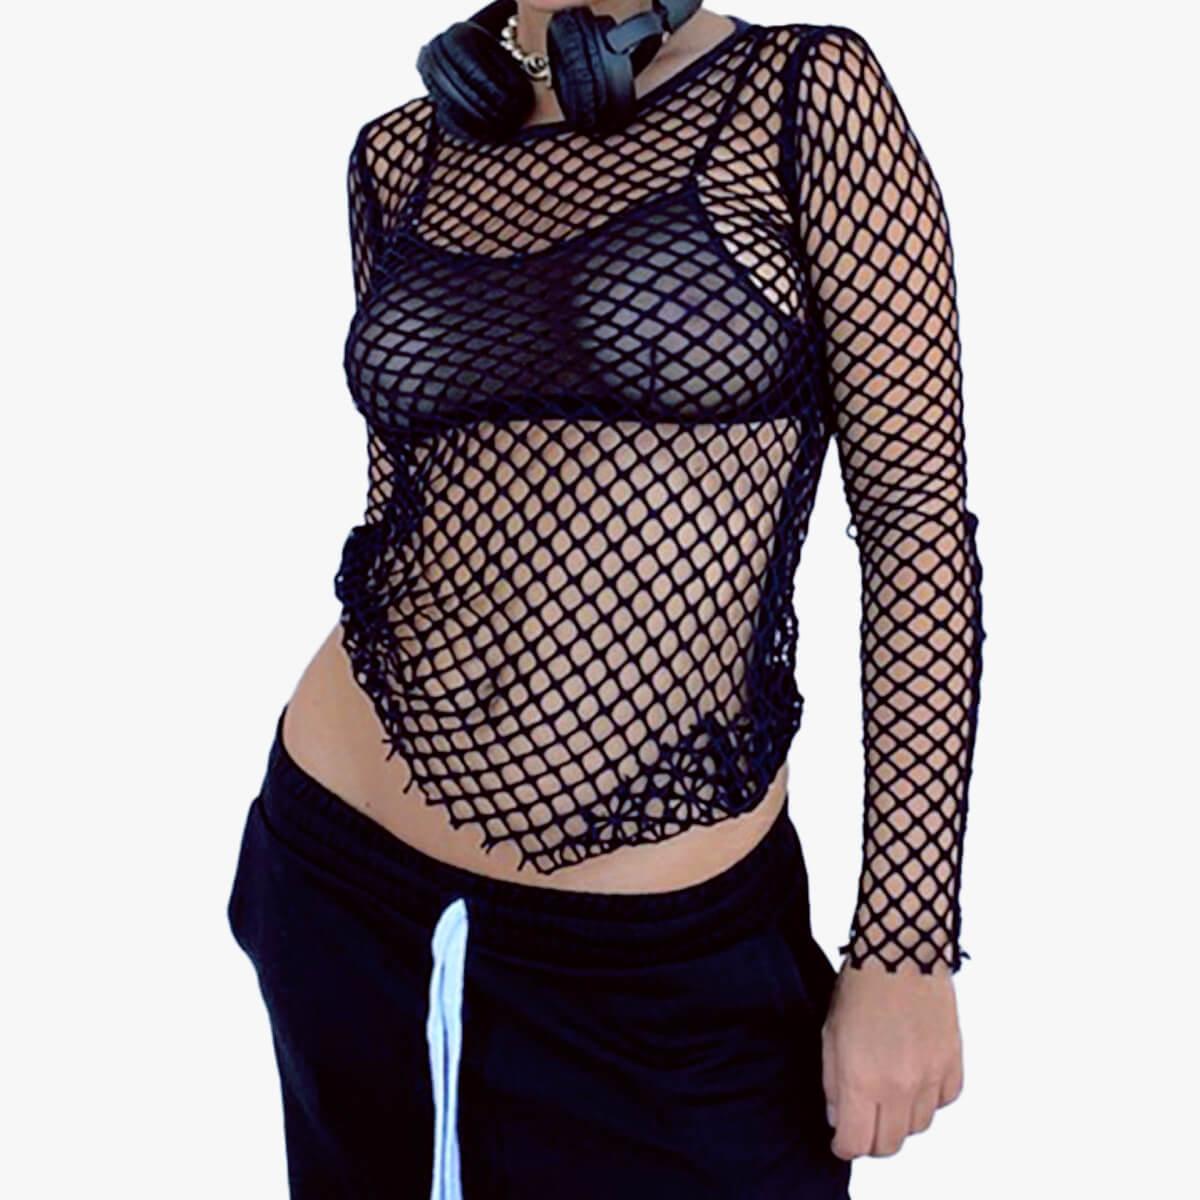 Black Grunge Aesthetic Fishnet Long Sleeve Top - Aesthetic Clothes Shop